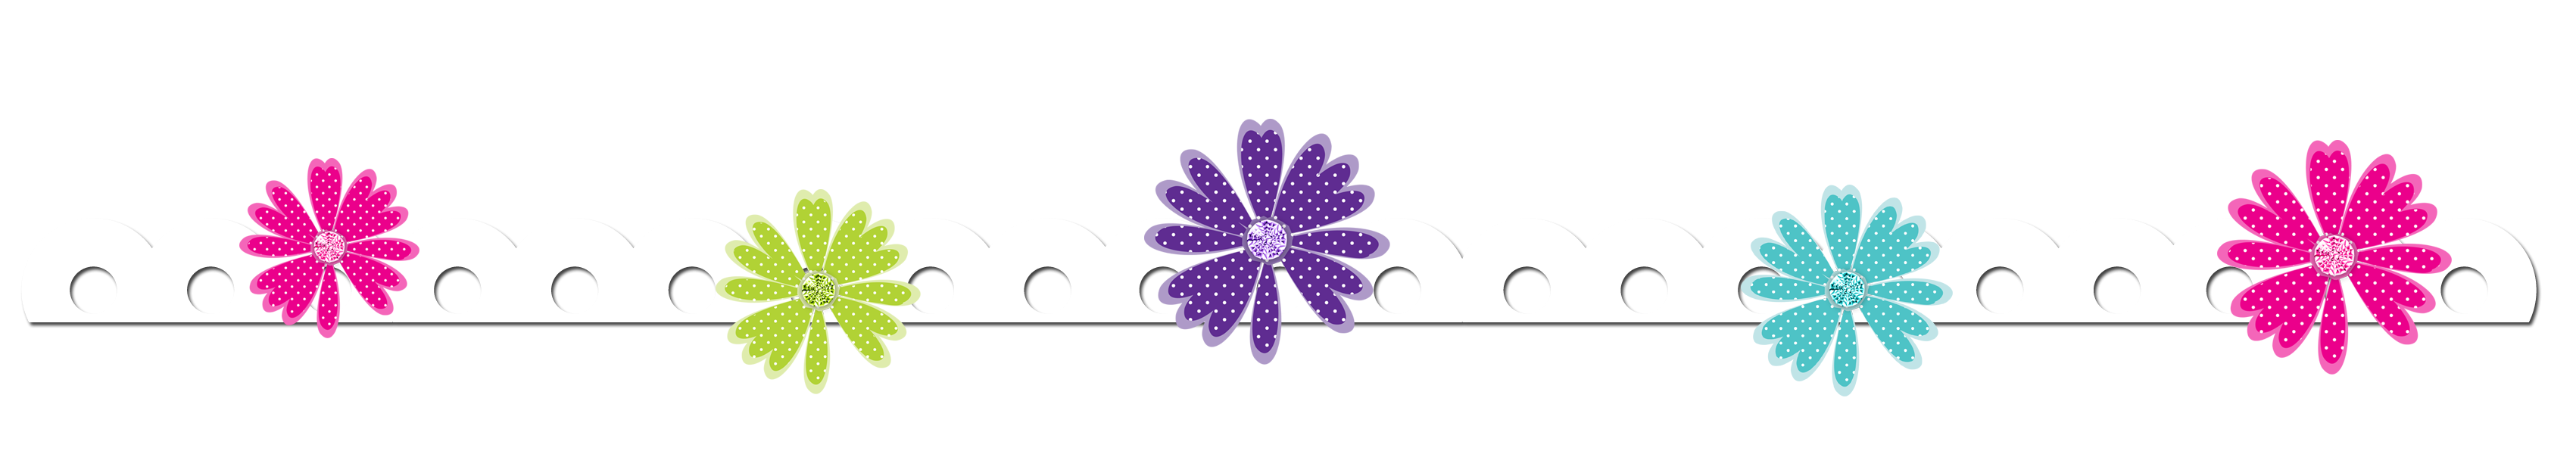 Free Flowery Border Cliparts, Download Free Clip Art, Free